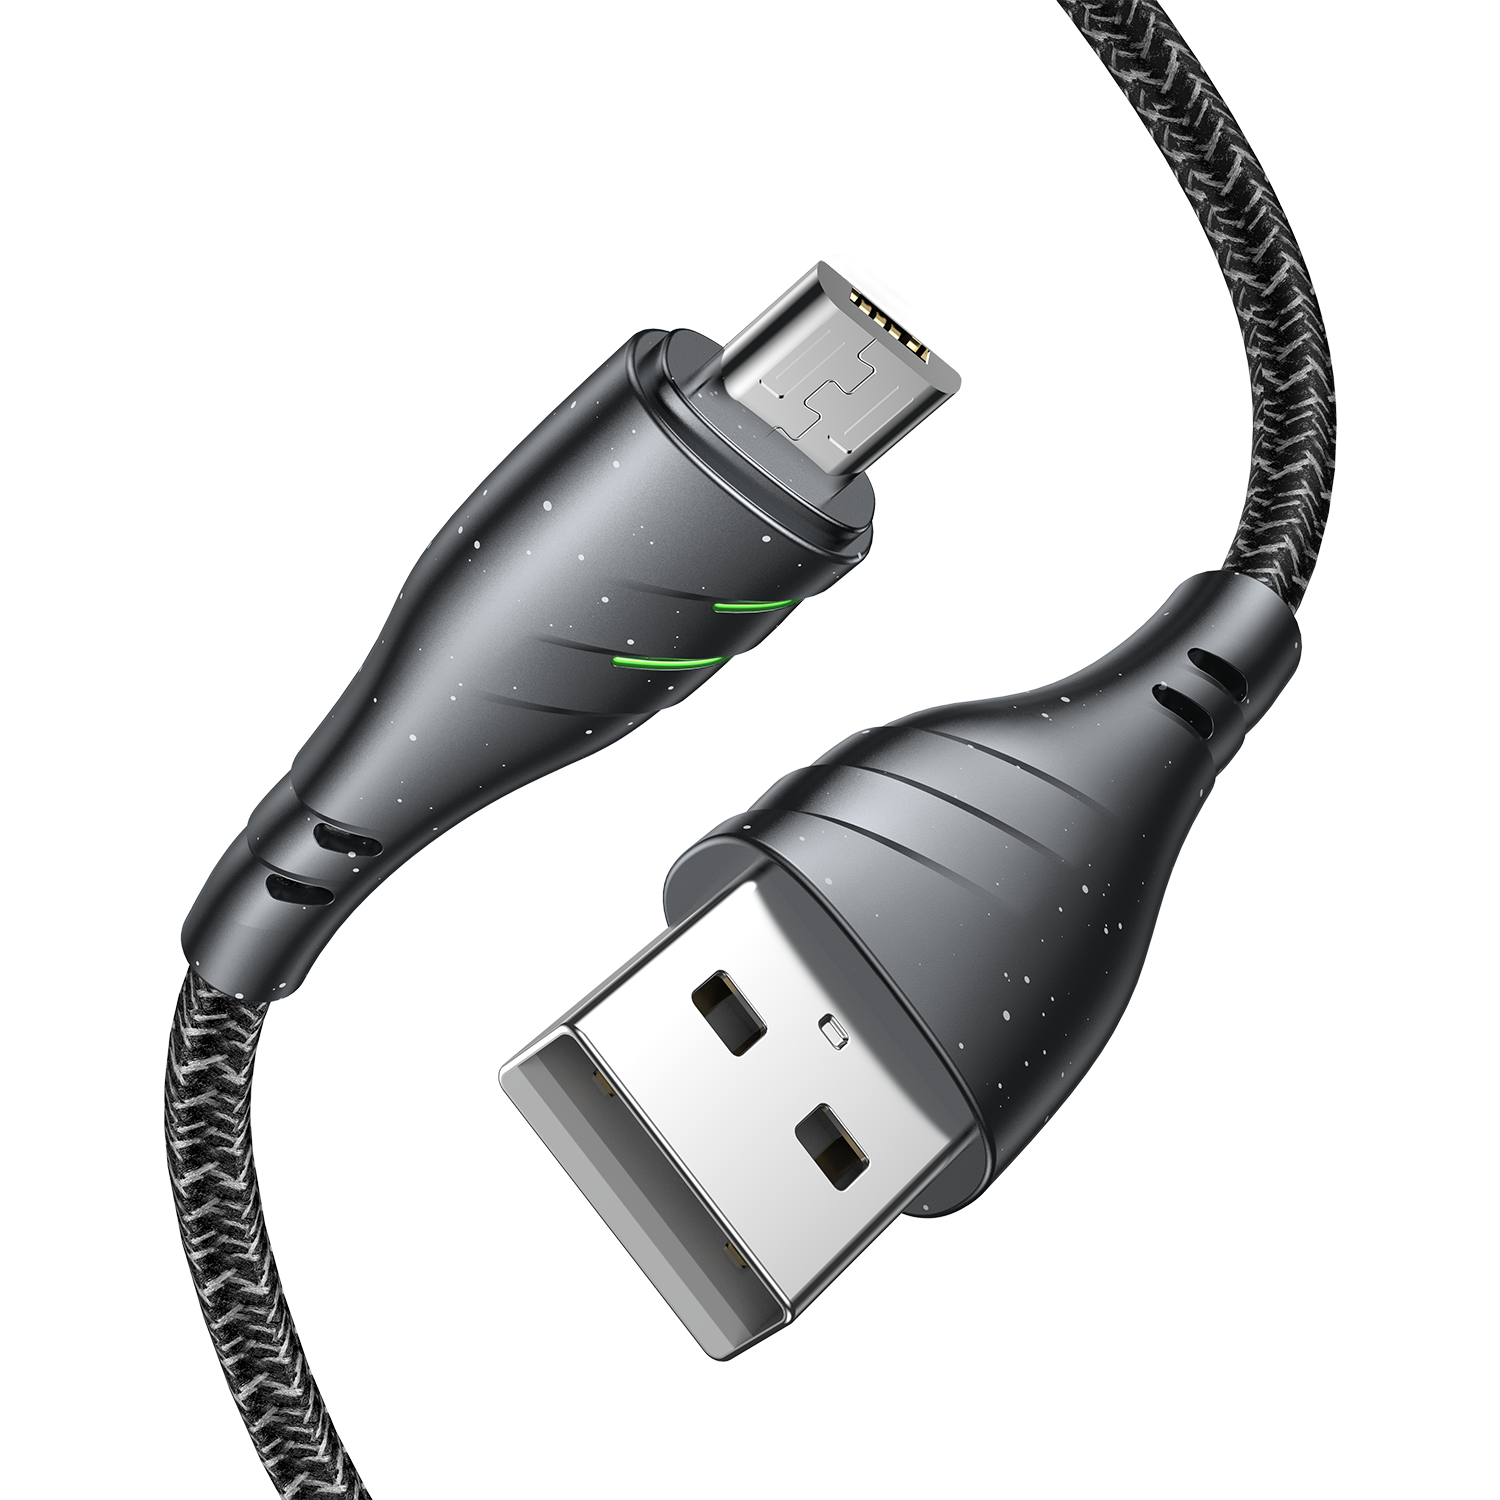 USB A to Micro USB Charging cable 2.4A